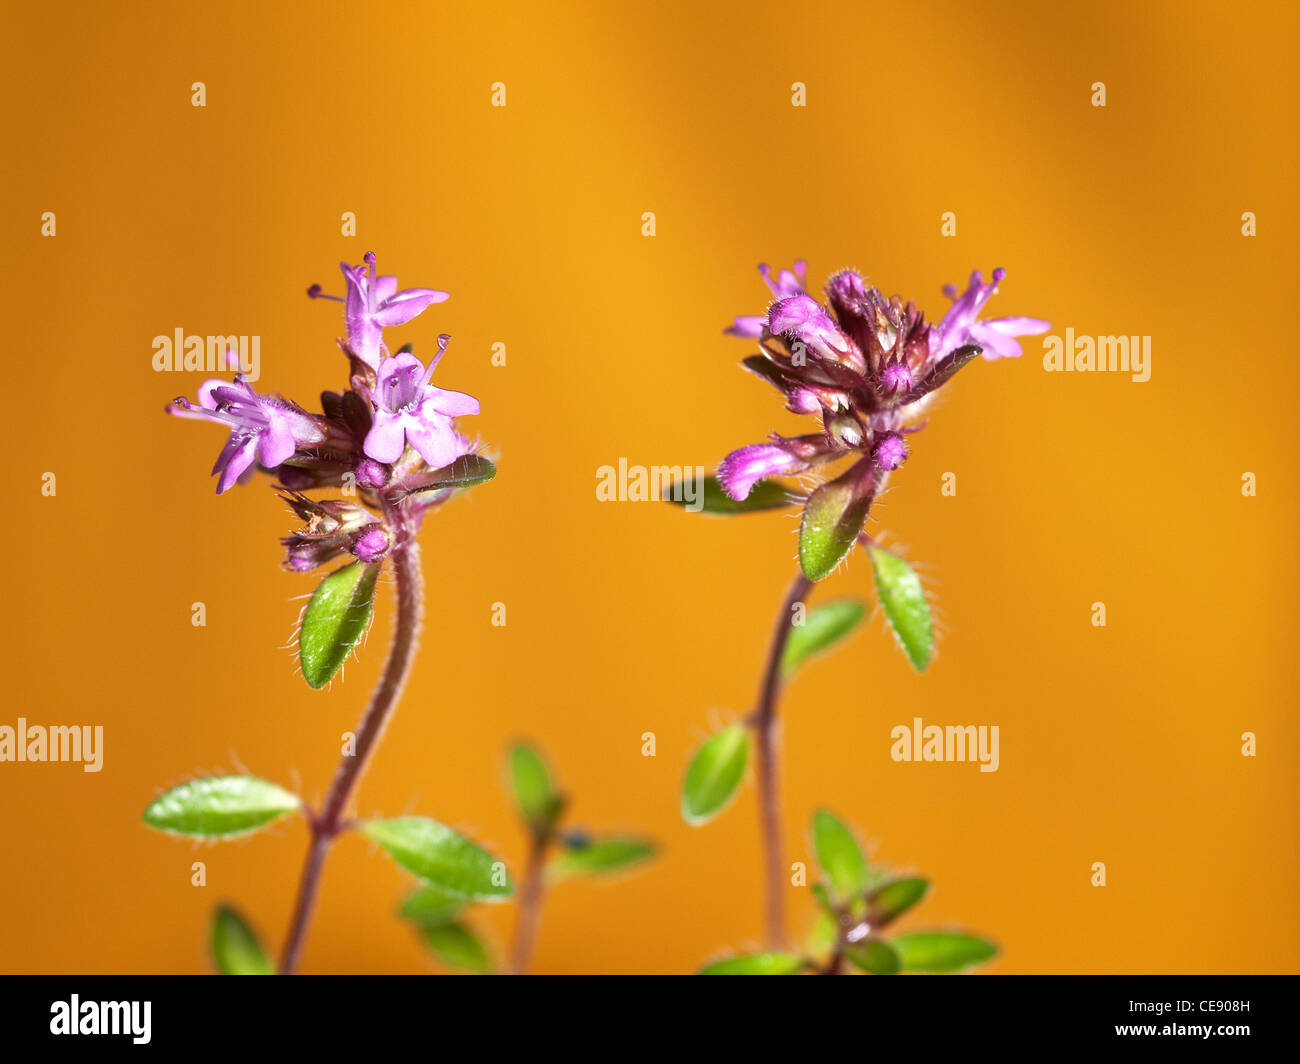 Thyme, Thymus longicalius, horizontal portrait of flowers with out focus background. Stock Photo